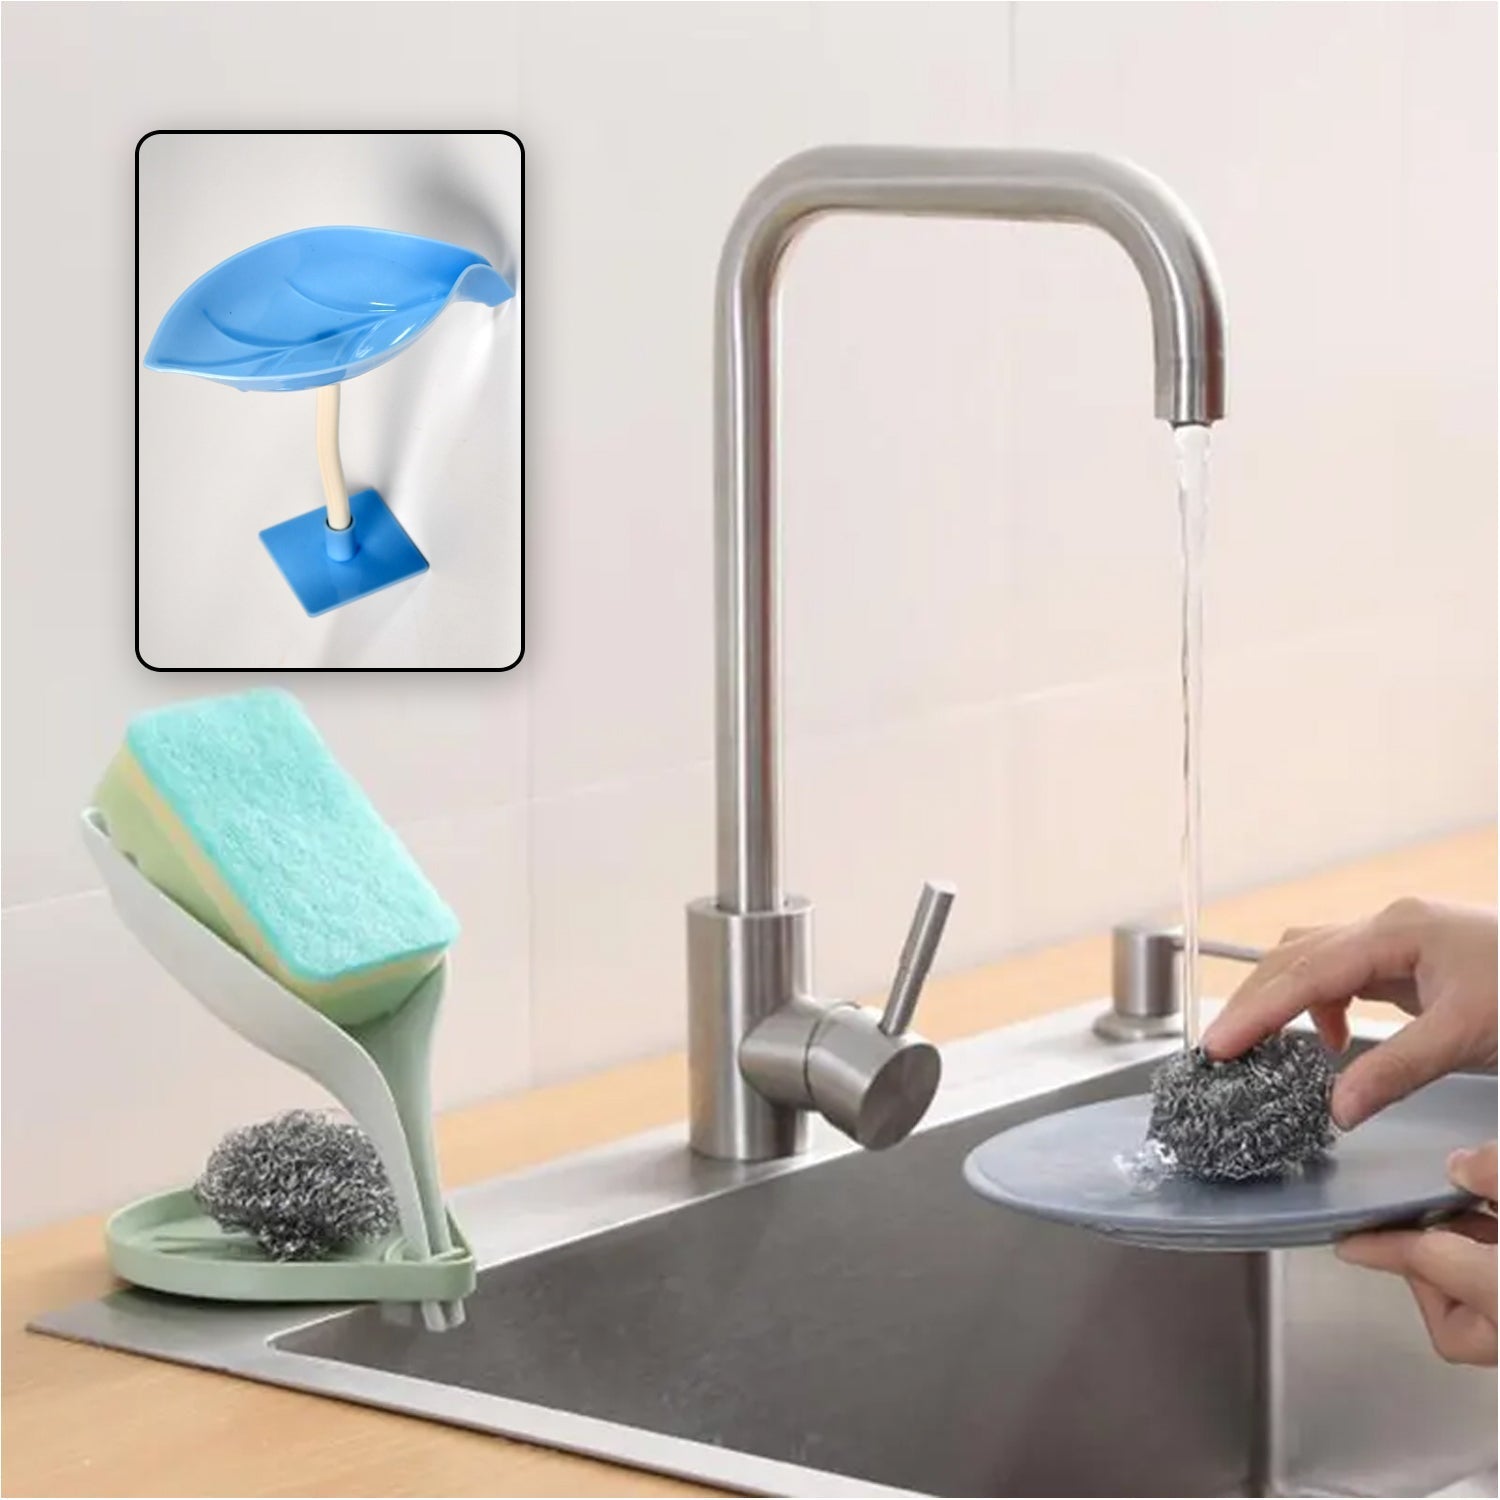 4084 Soap Holder Leaf-Shape Self Draining Soap Dish Holder, With Suction Cup Soap Dish Suitable for Shower, Bathroom, Kitchen Sink DeoDap